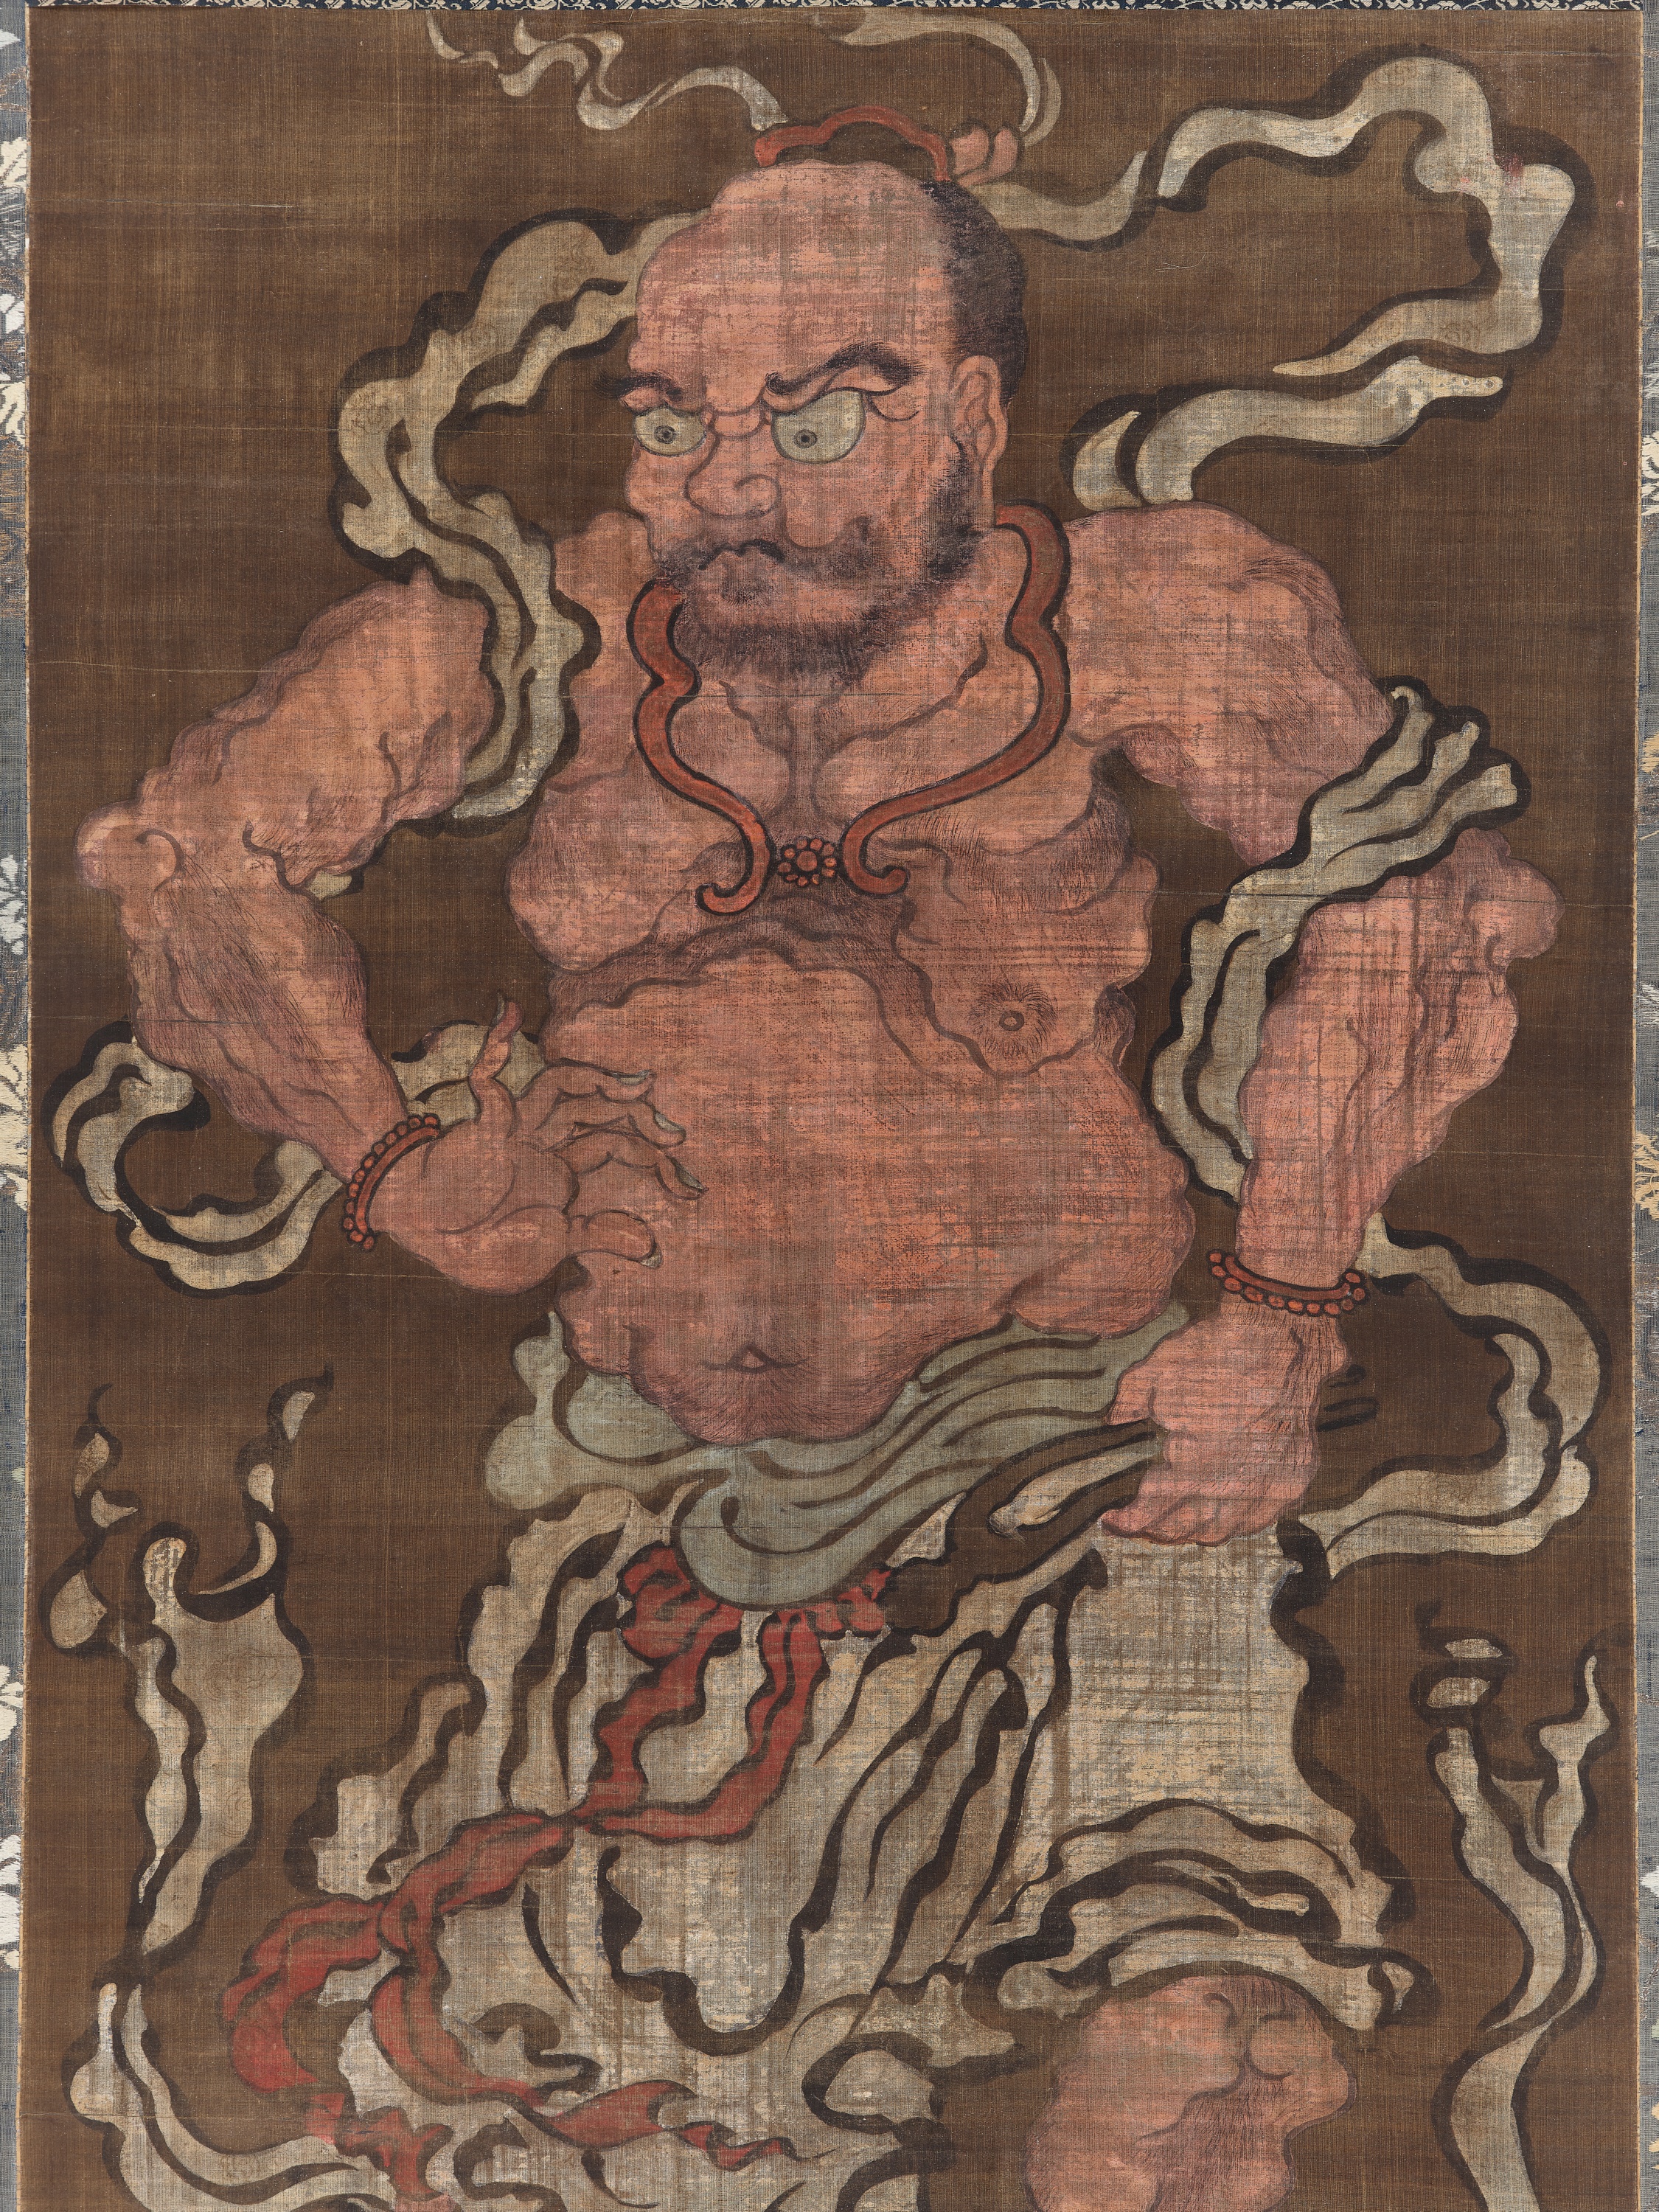 AN IMPRESSIVE PAIR OF LARGE SCROLL PAINTINGS DEPICTING NIO GUARDIANS - Image 4 of 7